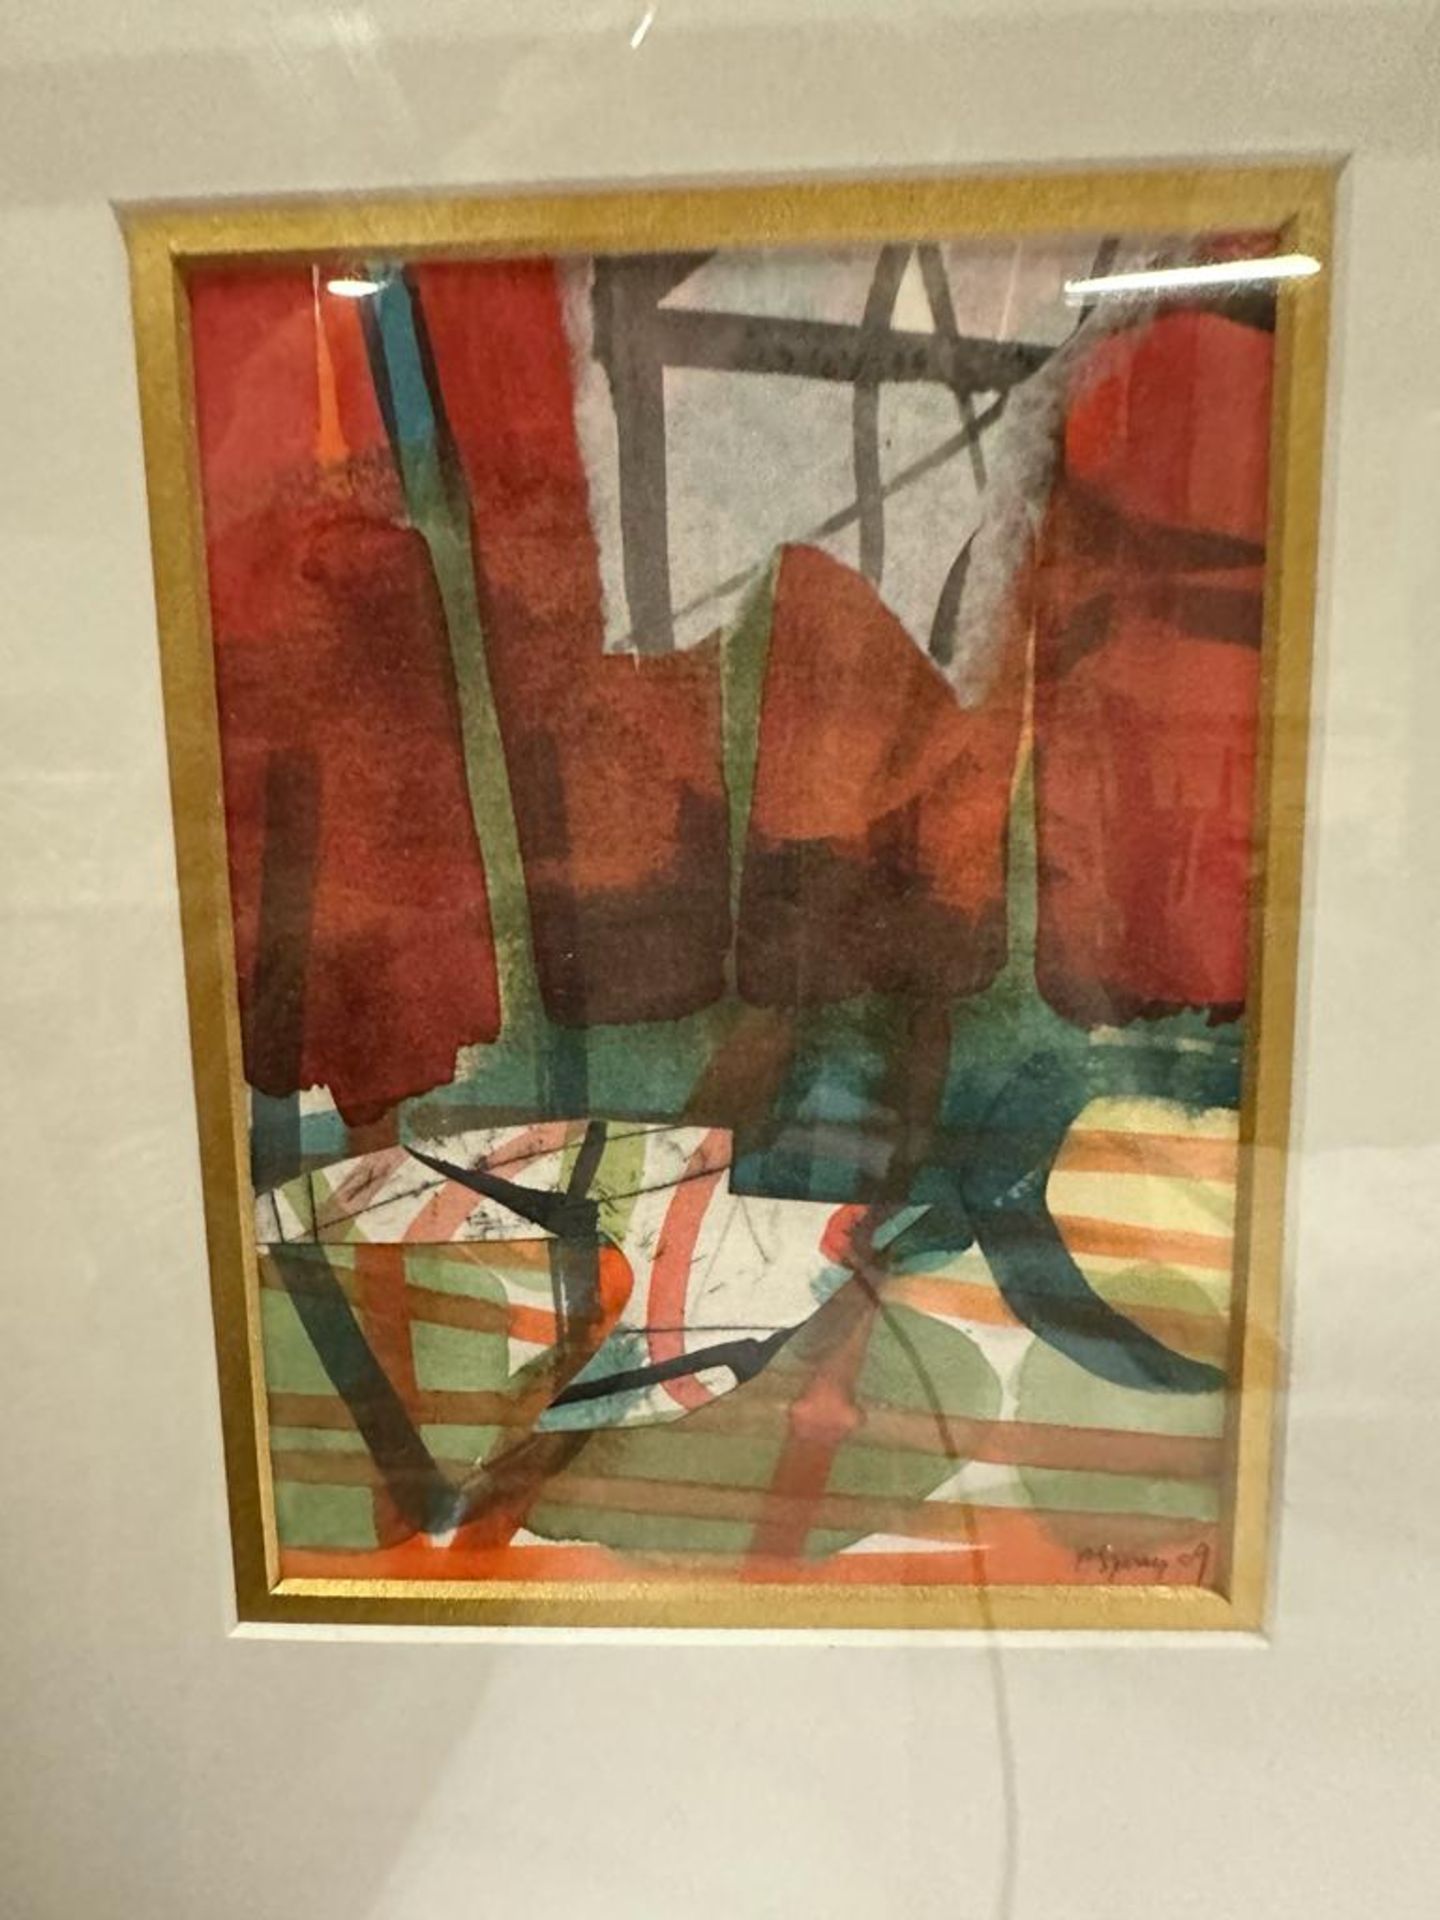 Framed Lithograph Abstract Signature Indistinct 33 x 39cm - Image 2 of 2